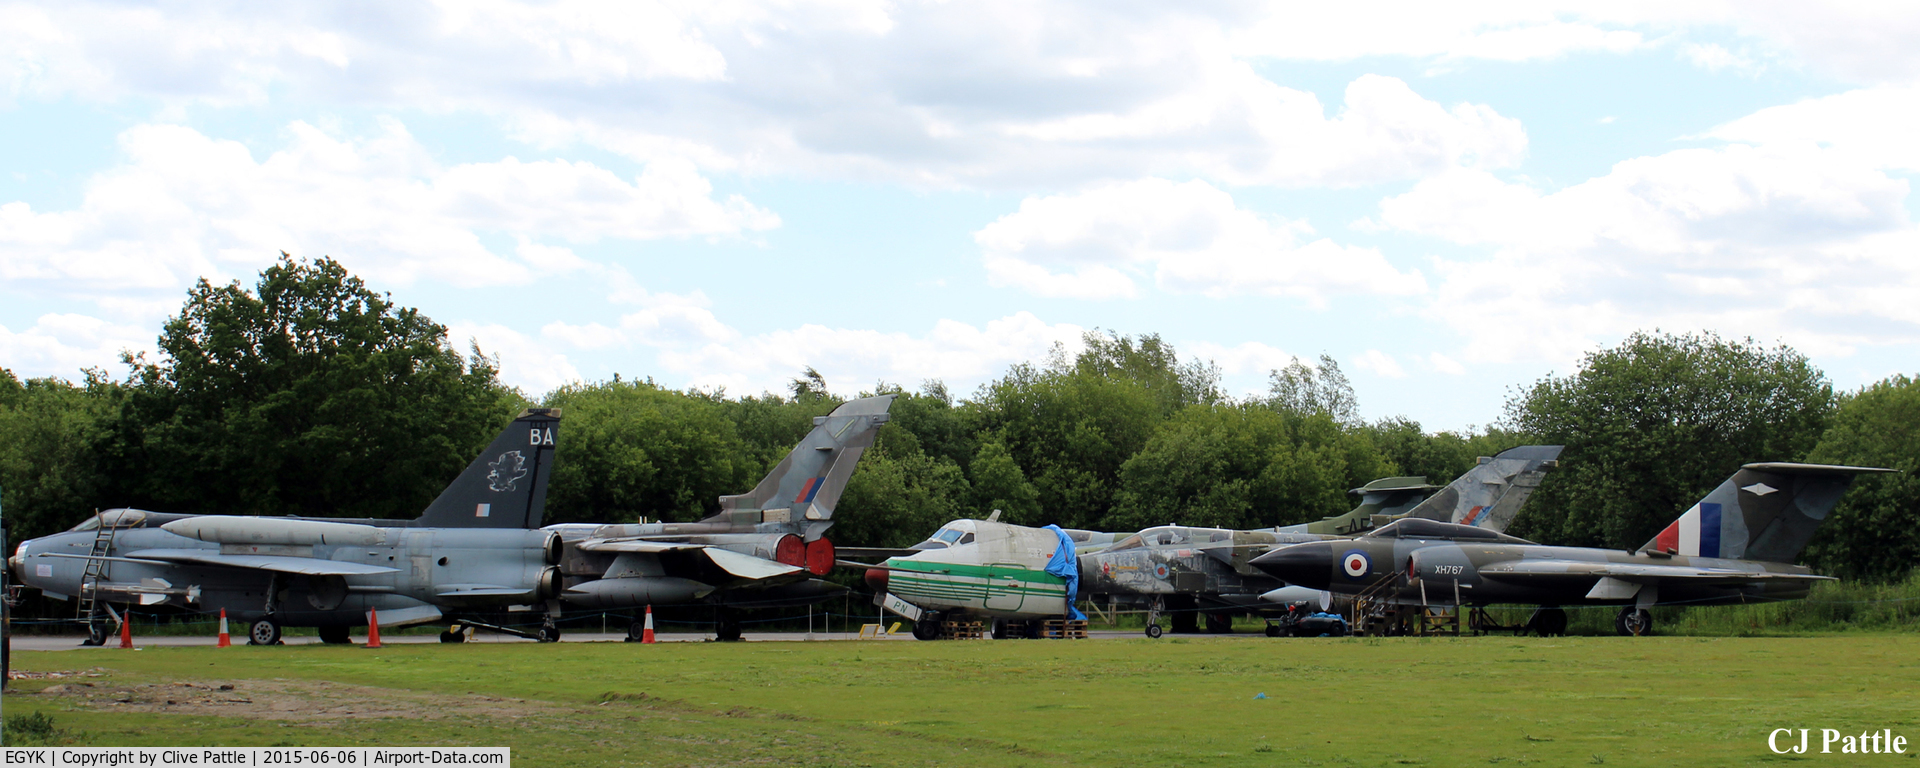 EGYK Airport - A view of one of the Aircraft exhibition line-ups at the Yorkshire Air Museum at Elvington EGYK